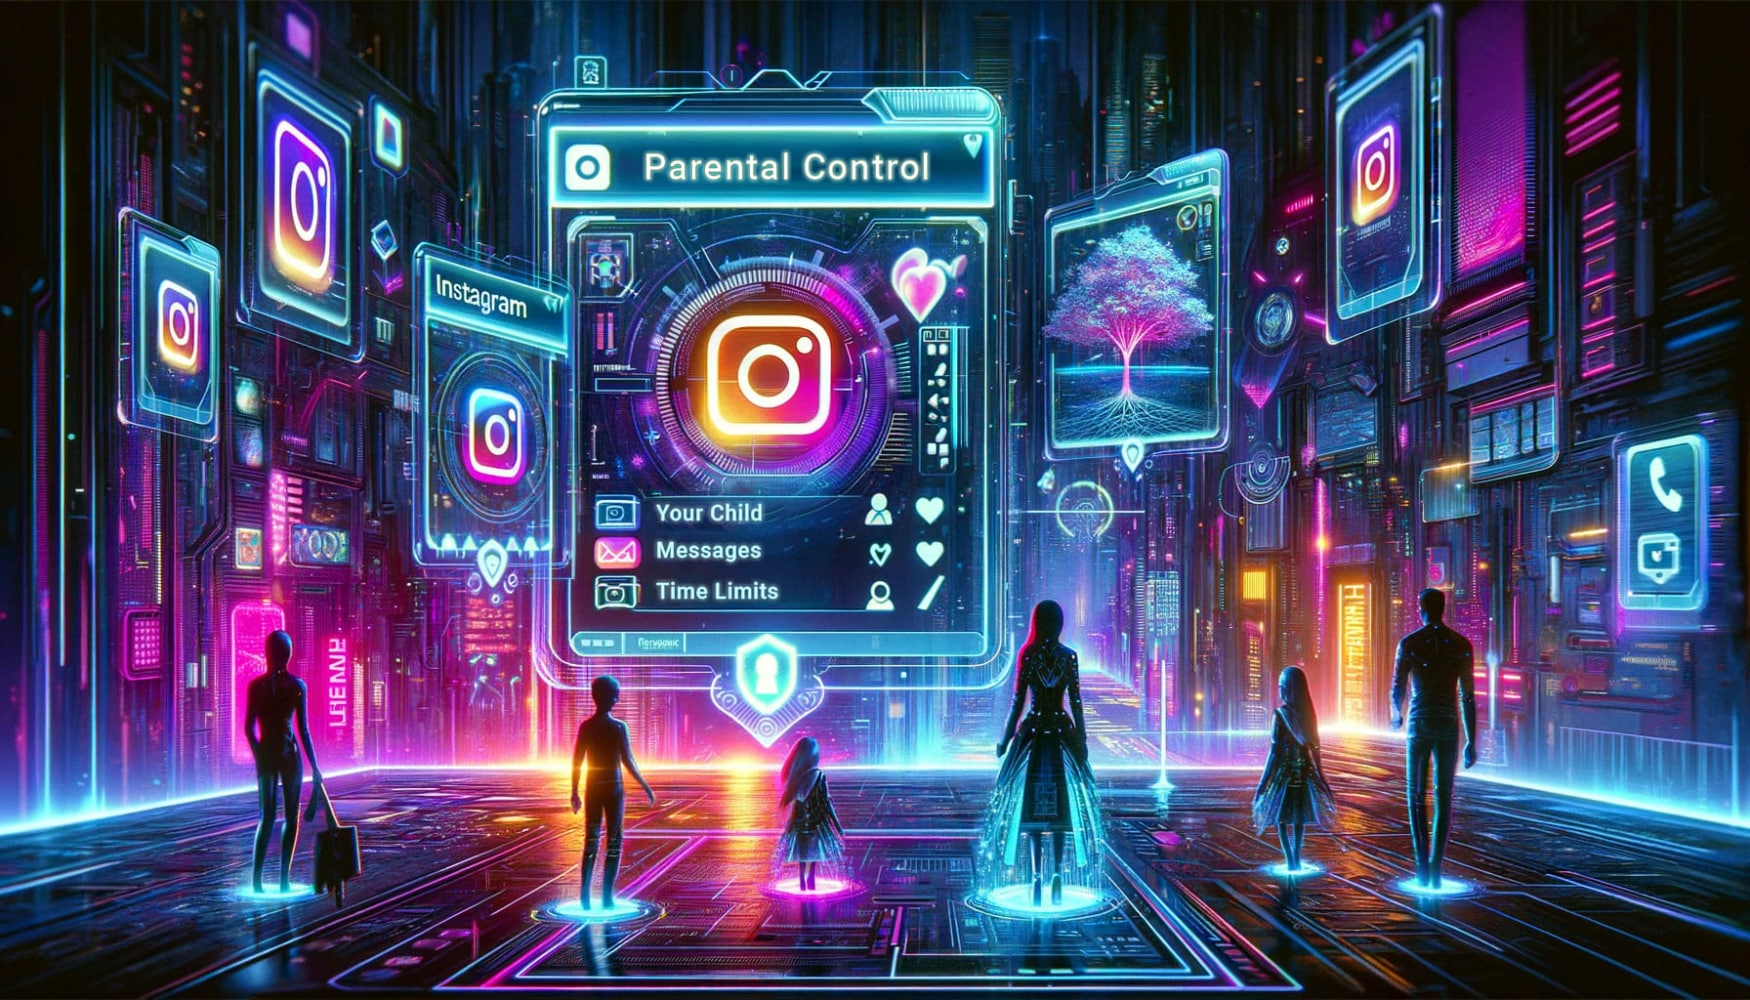 Three adults and three children standing in the instagram ecosystem in front of large glowing screens with instagram logos and the largest one revealing information about parental controls